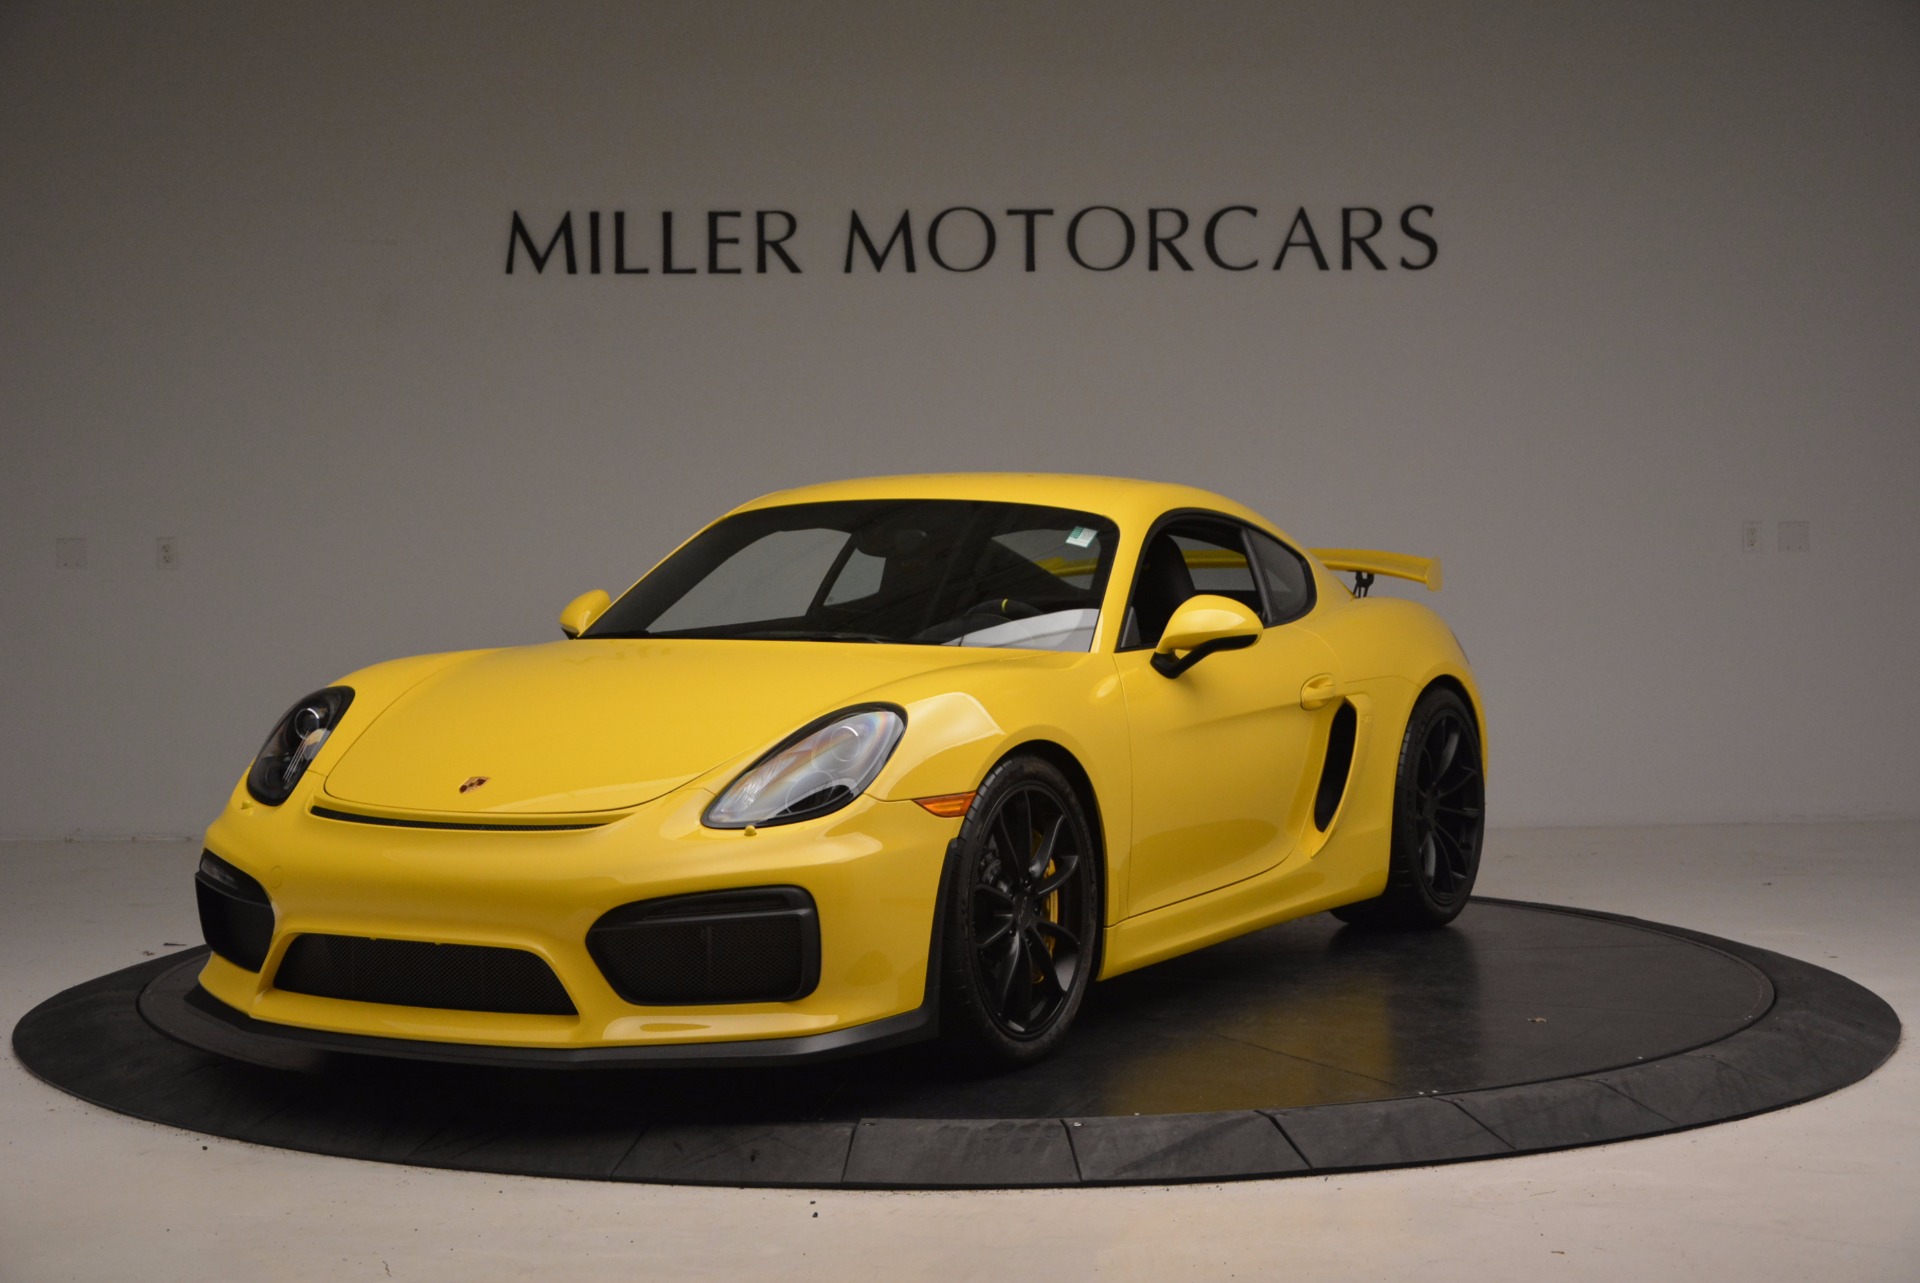 Used 2016 Porsche Cayman GT4 for sale Sold at Rolls-Royce Motor Cars Greenwich in Greenwich CT 06830 1